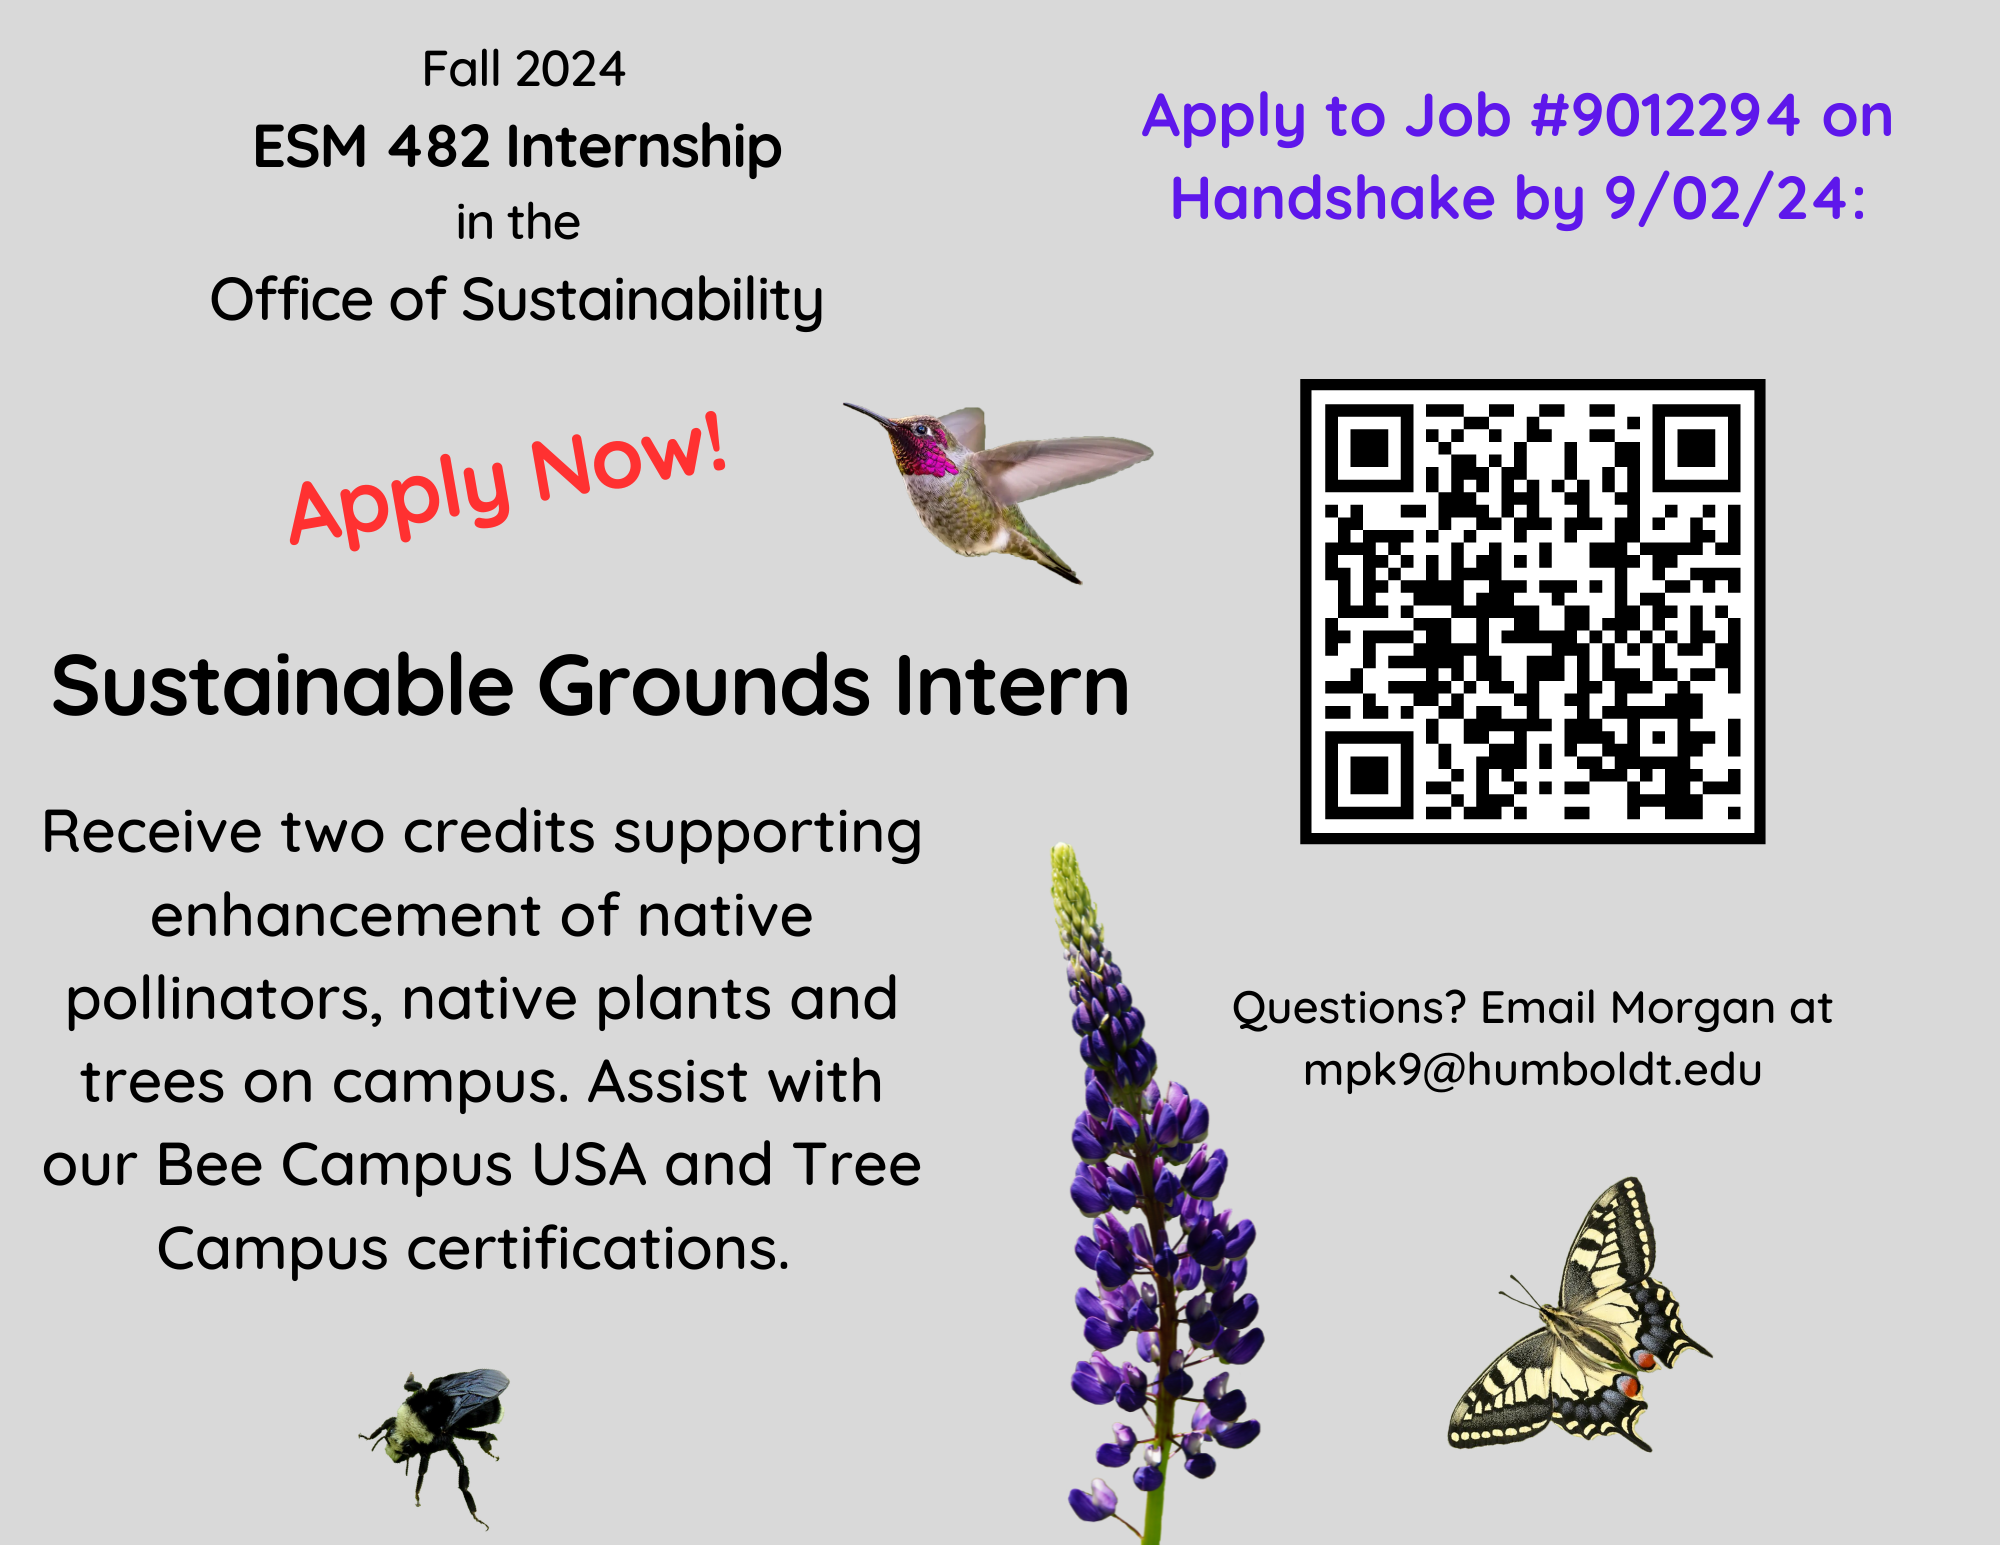 Flyer for Fall 2024 semester internship with the Office of Sustainability